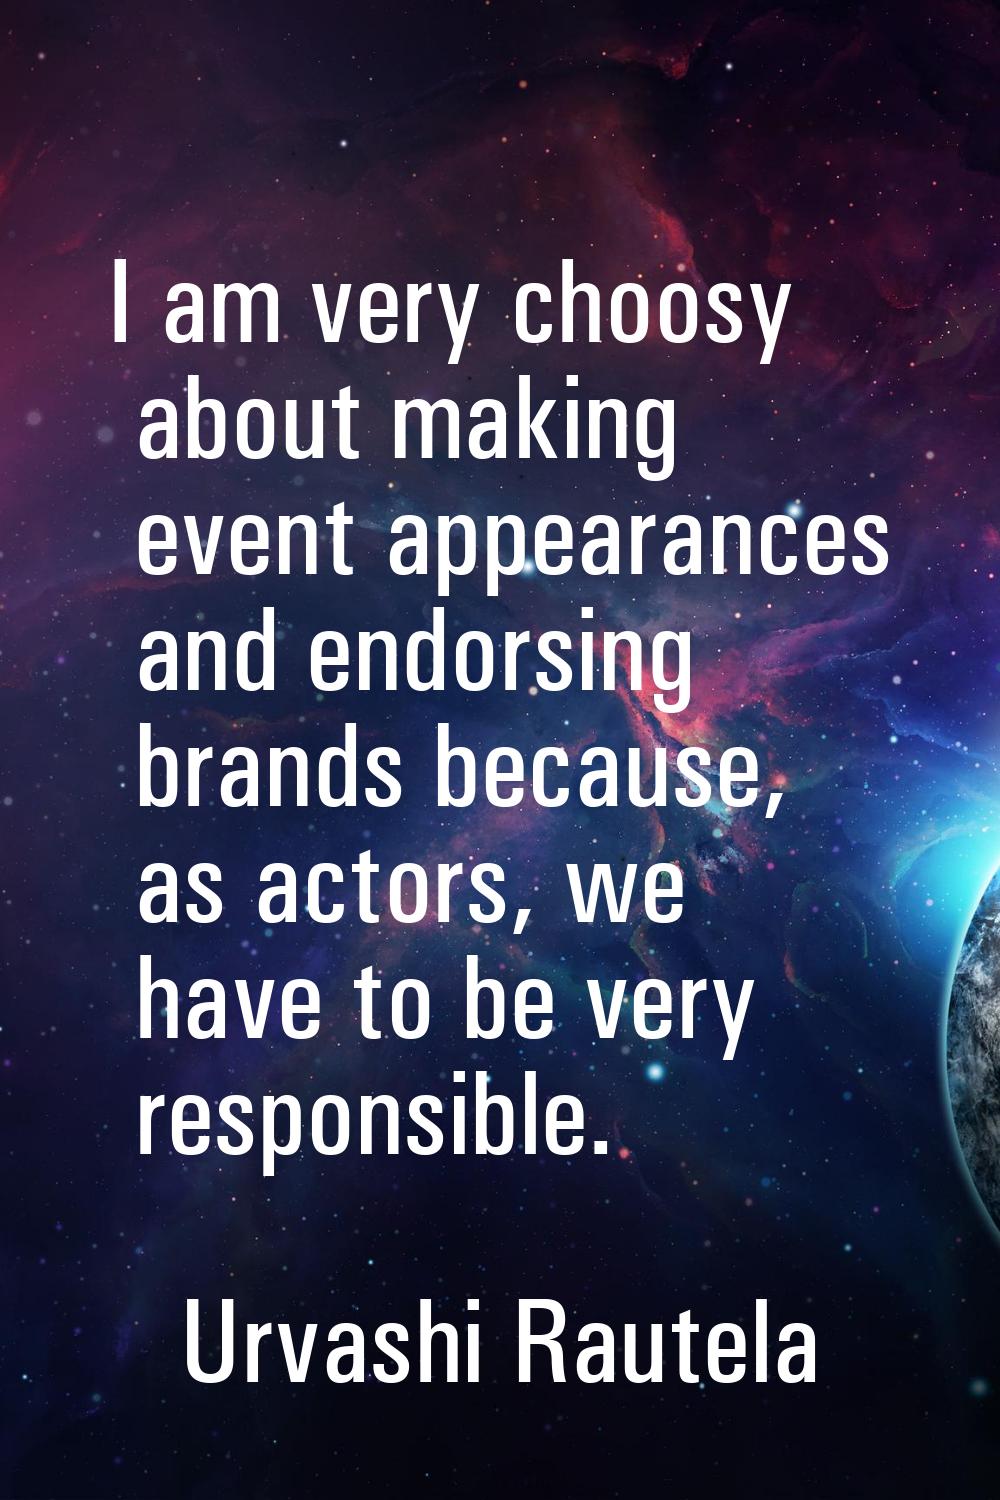 I am very choosy about making event appearances and endorsing brands because, as actors, we have to